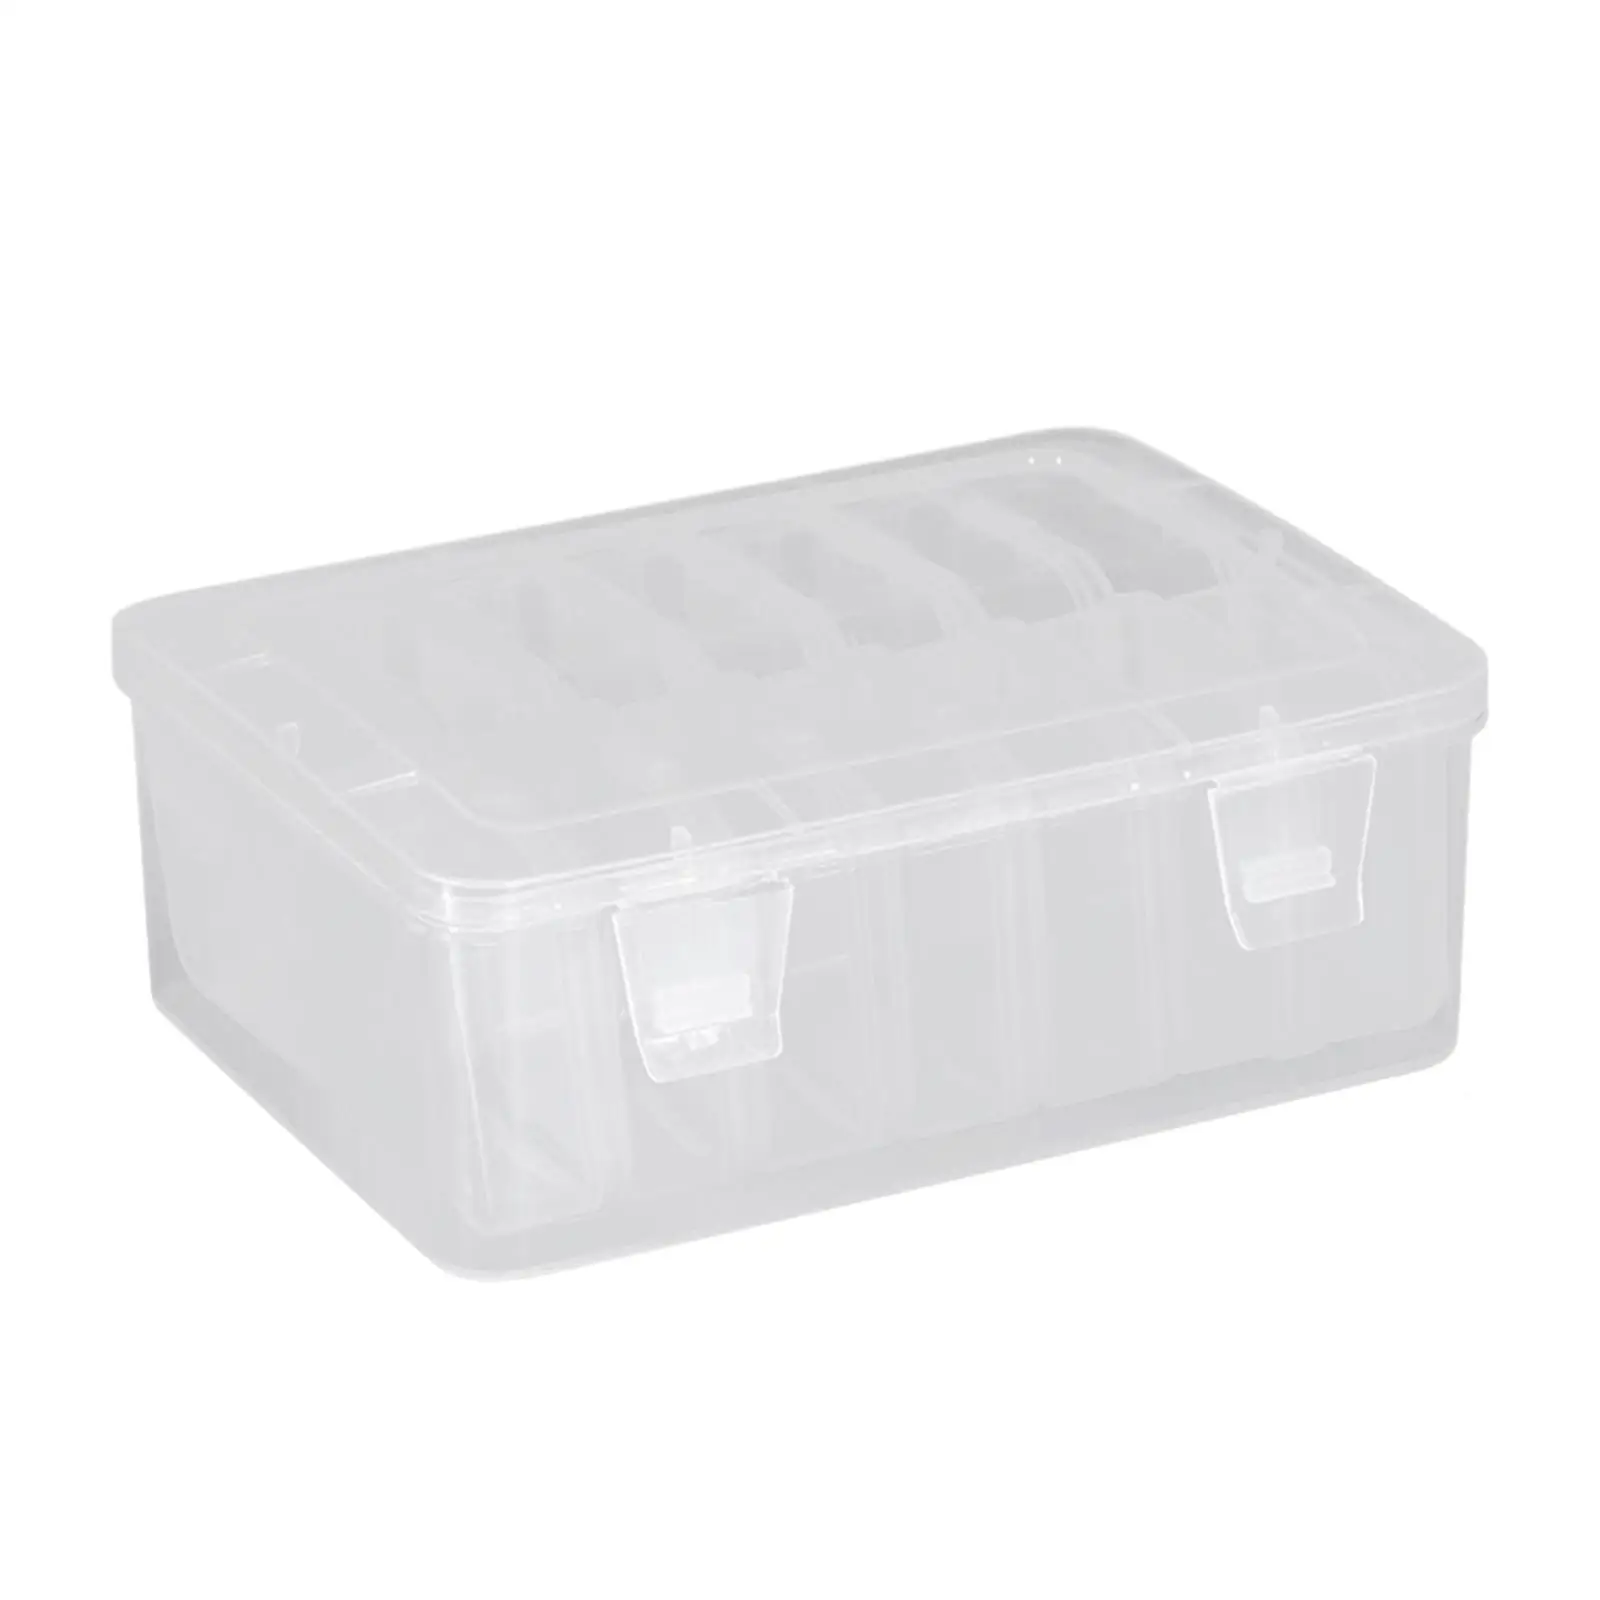 15 Pieces Rectangle Bead Organizers Box with Hinged Lid Small Clear Bead Storage Containers Boxes for Earrings Craft Supplies